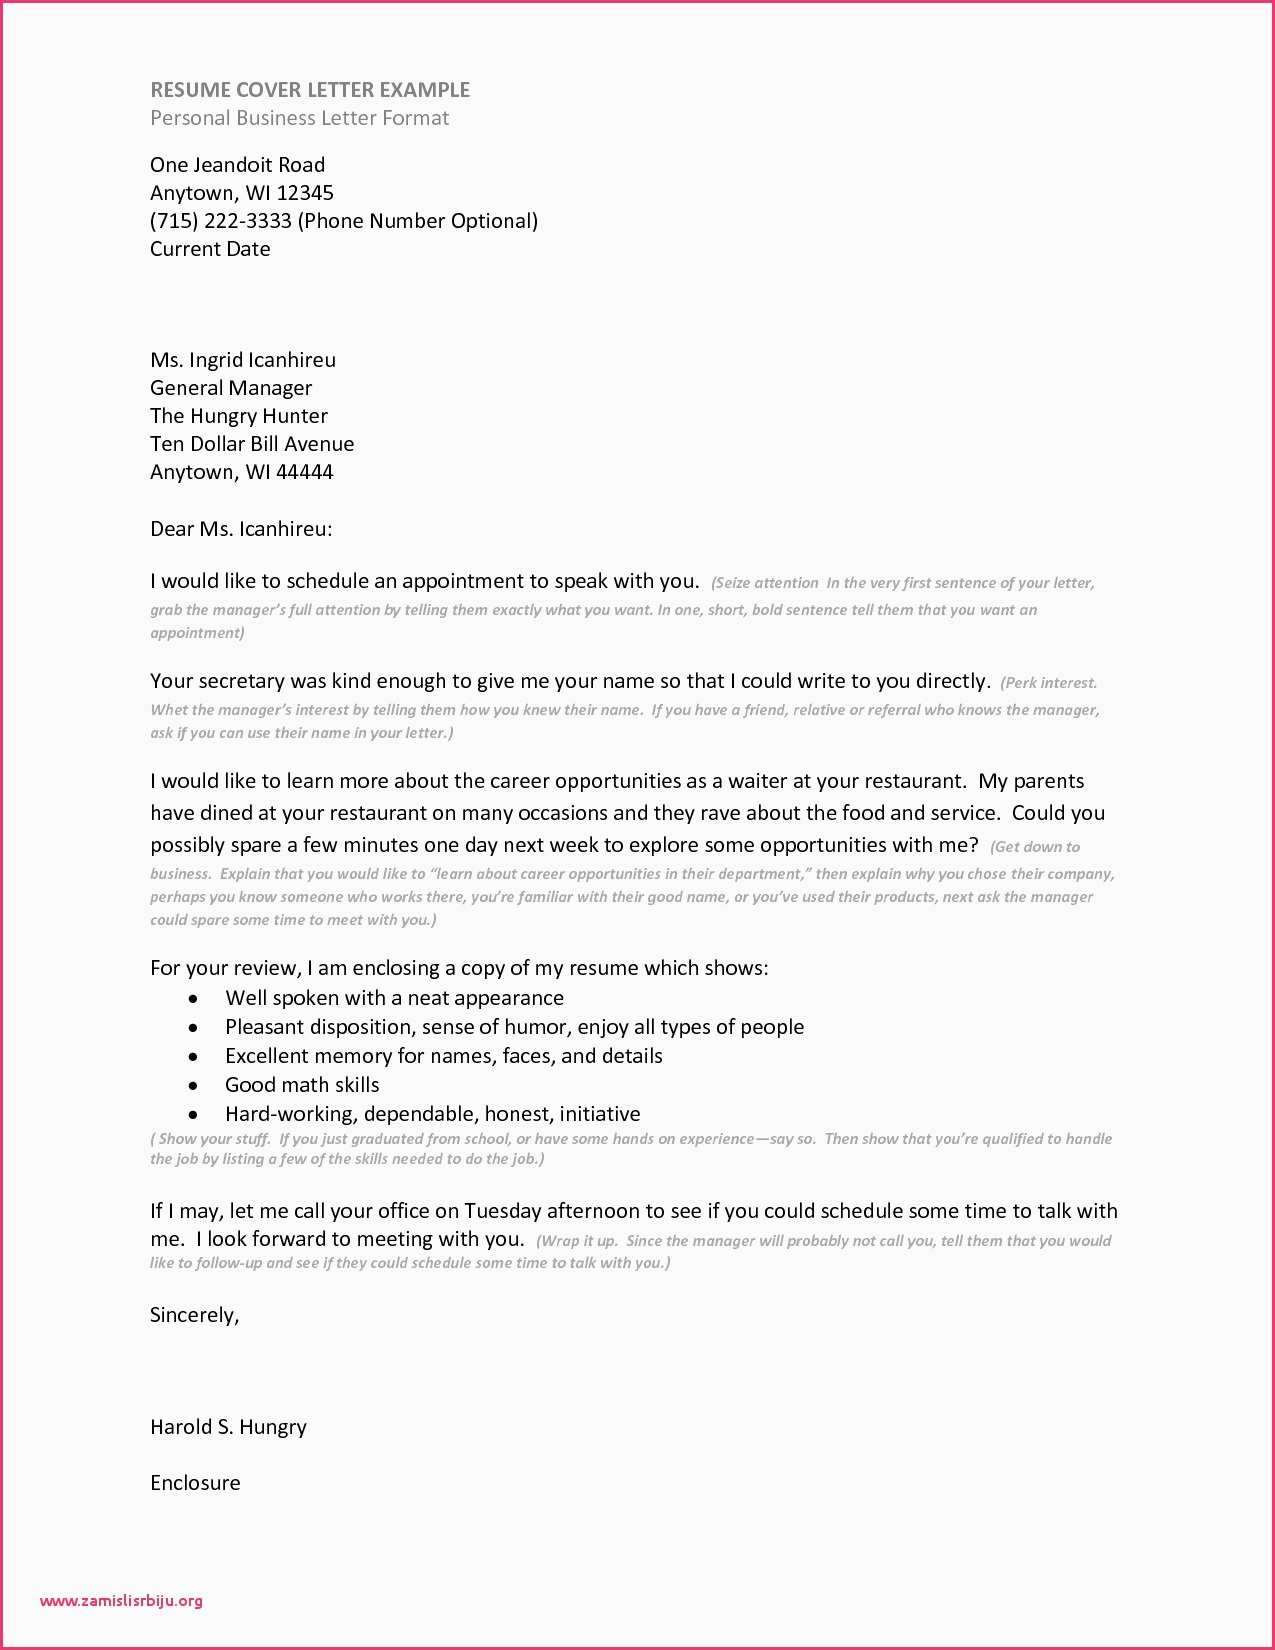 business agreement template new meeting appointment letter sample business letter separation of business agreement template